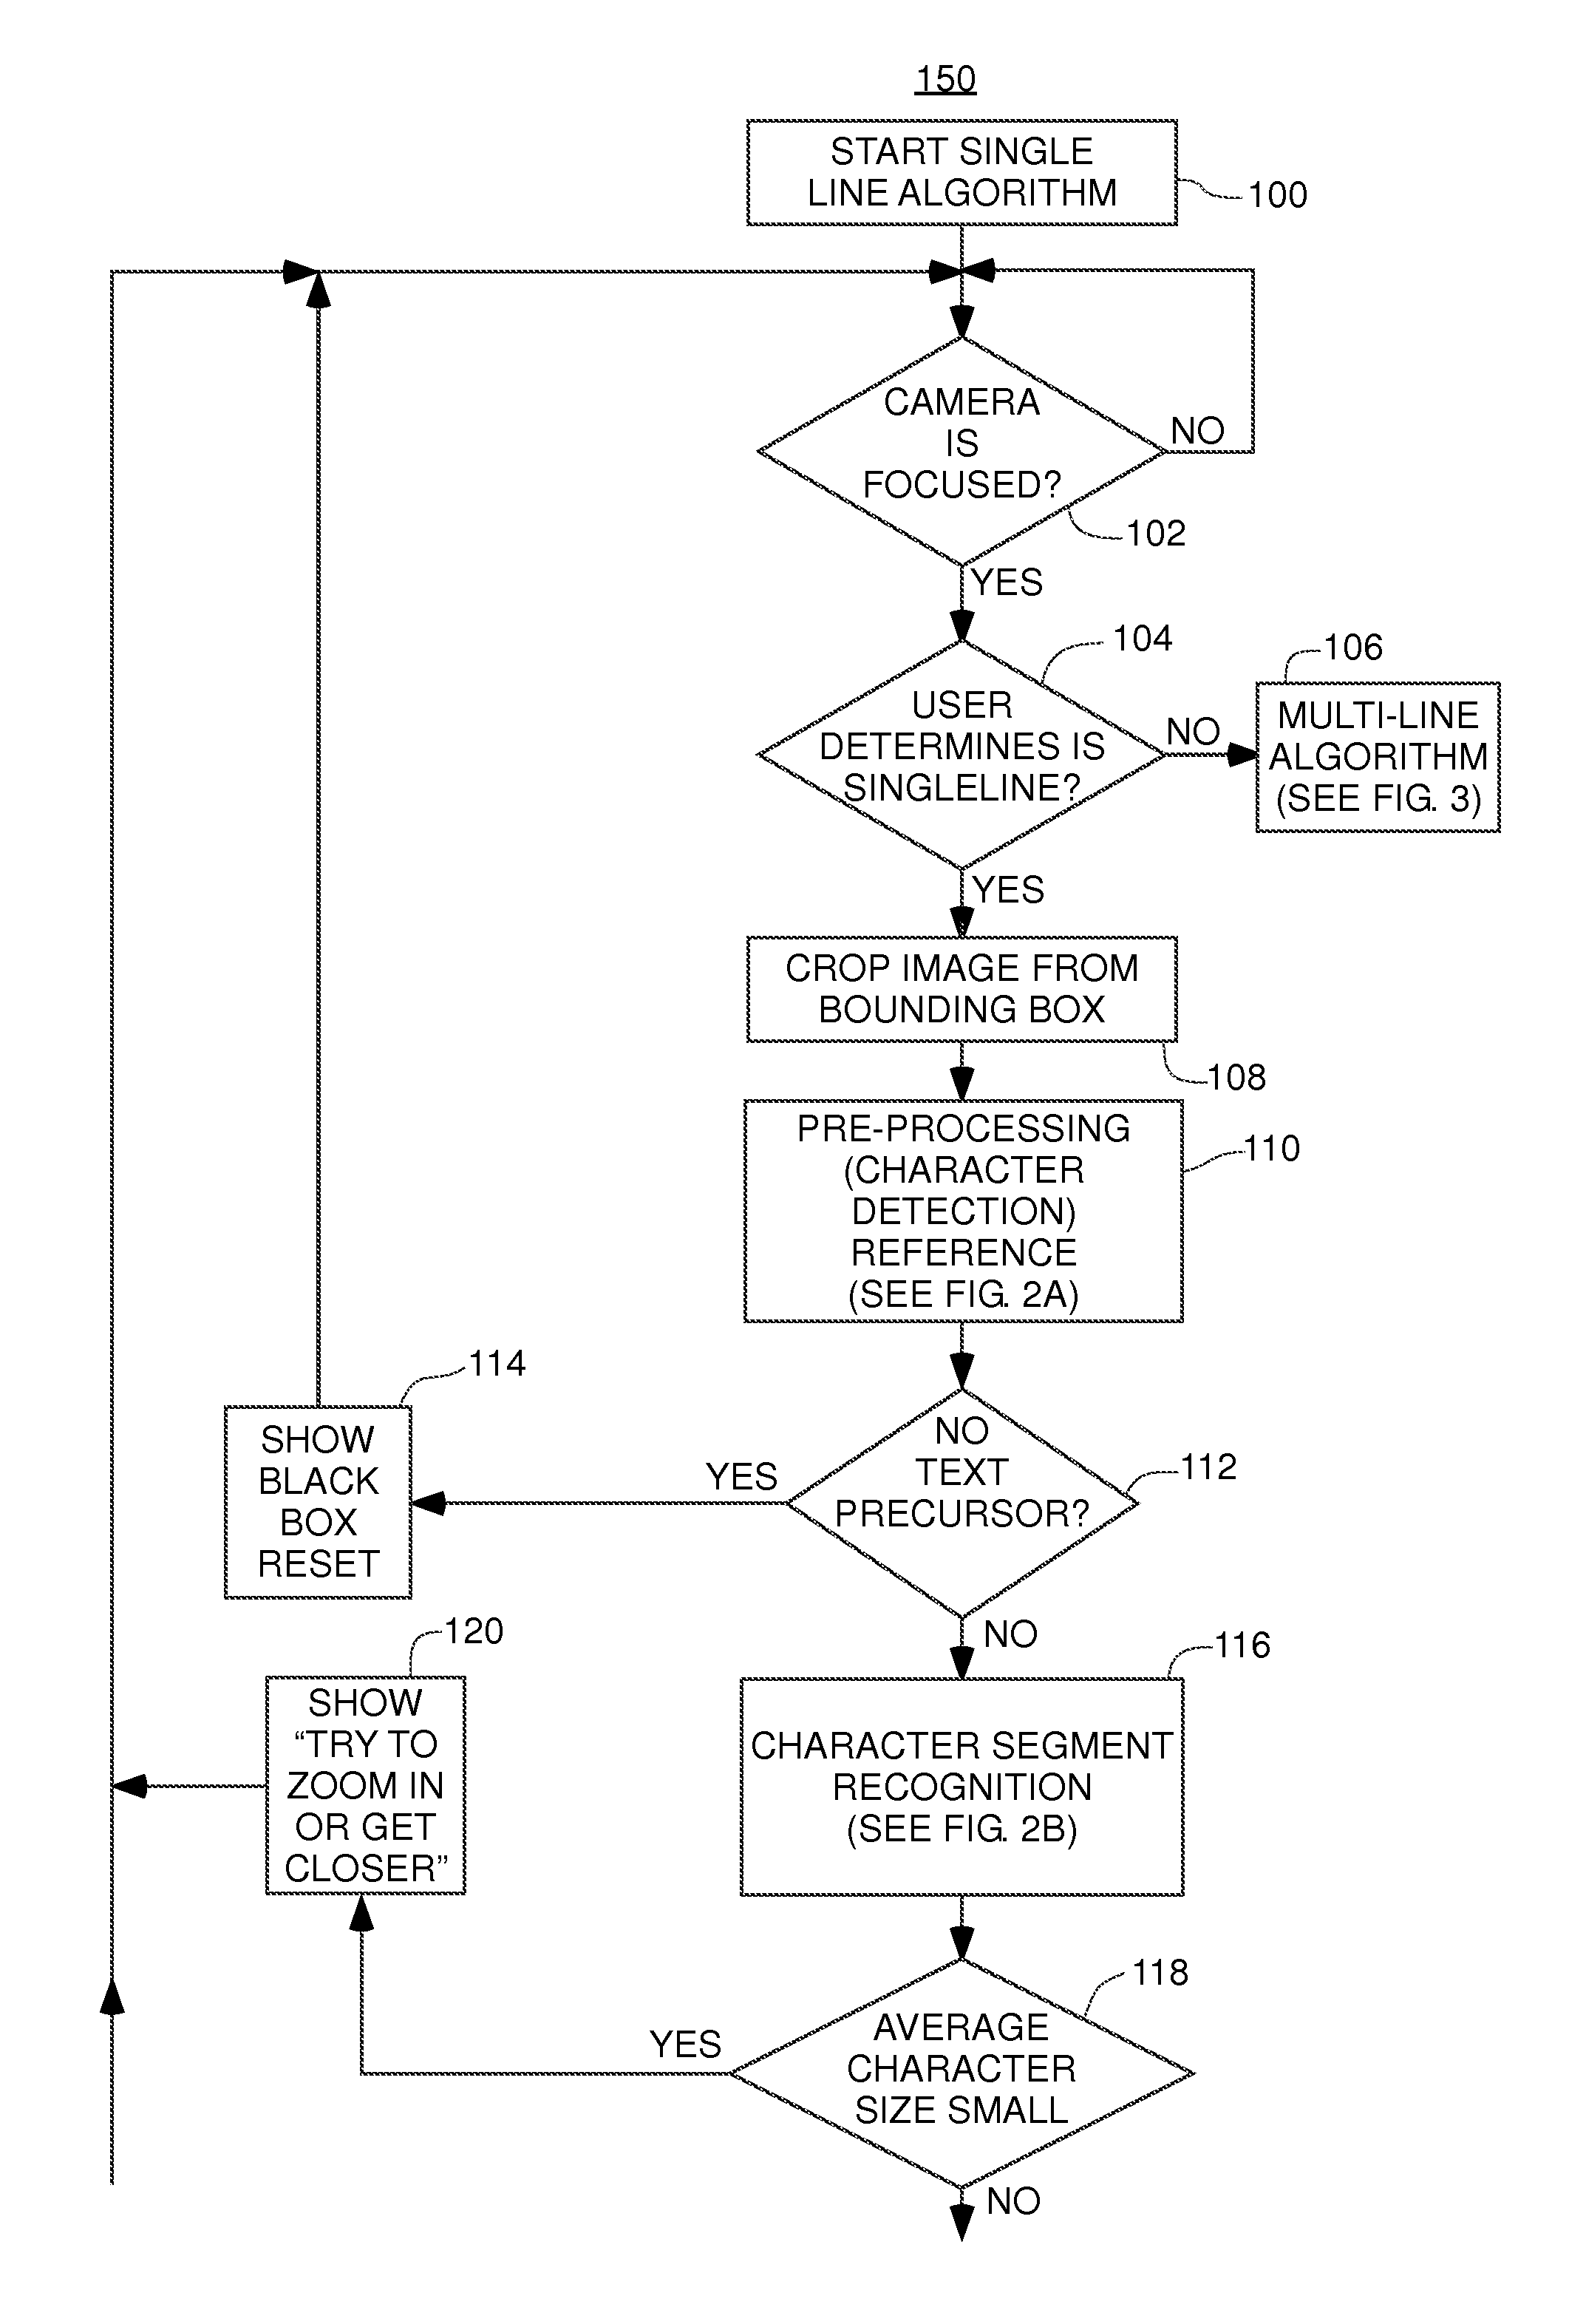 Systems and methods for determining and displaying multi-line foreign language translations in real time on mobile devices